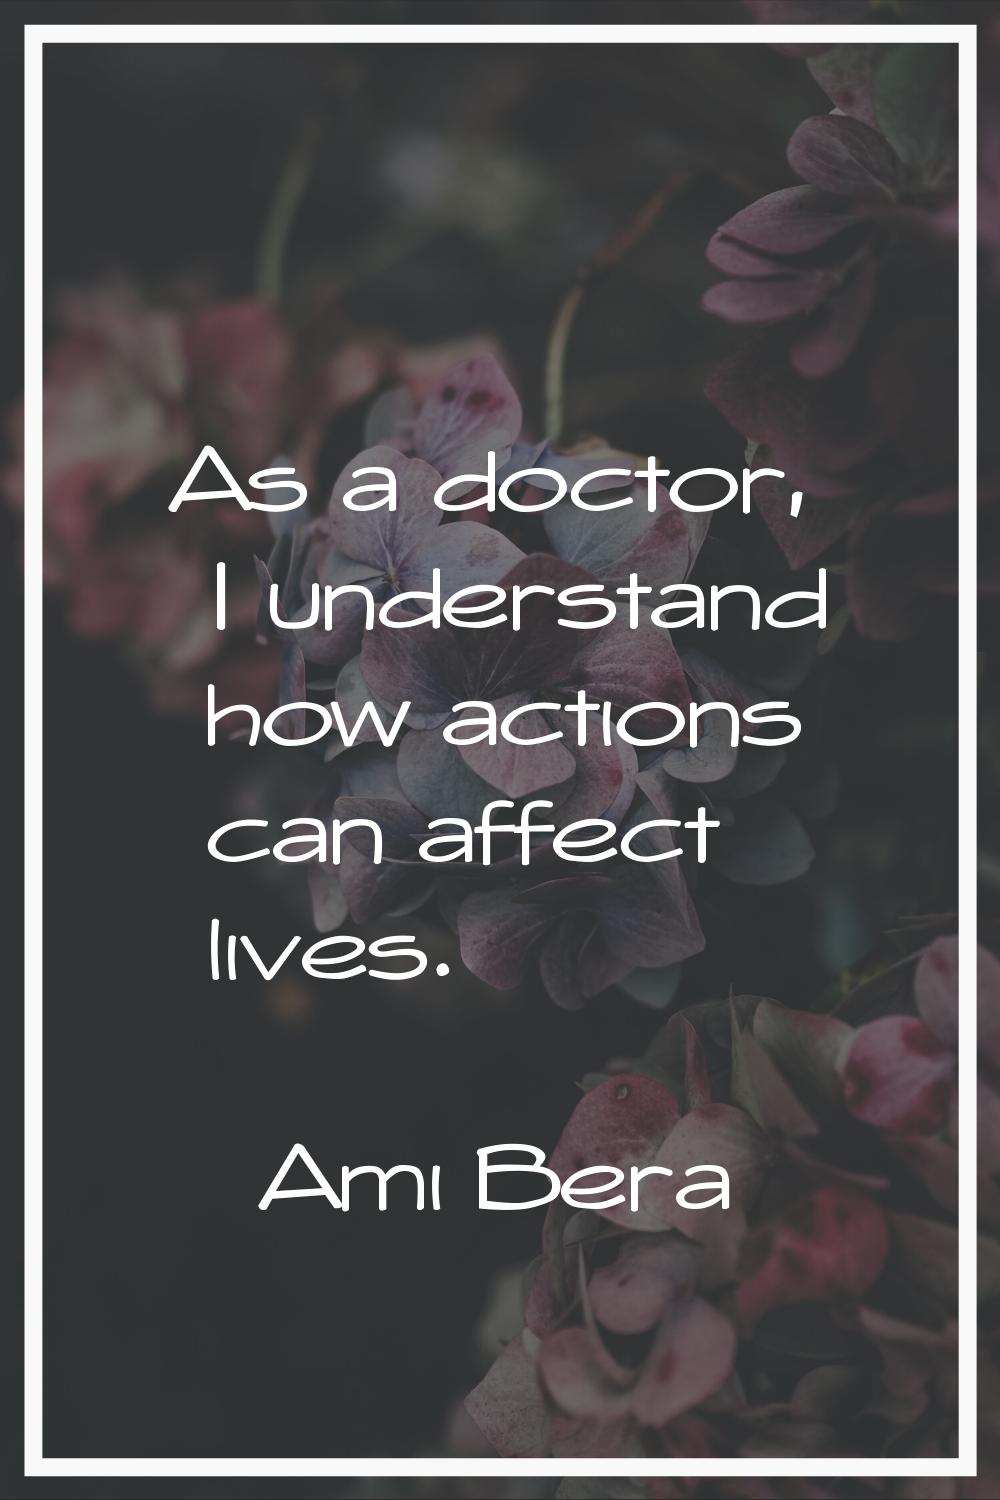 As a doctor, I understand how actions can affect lives.